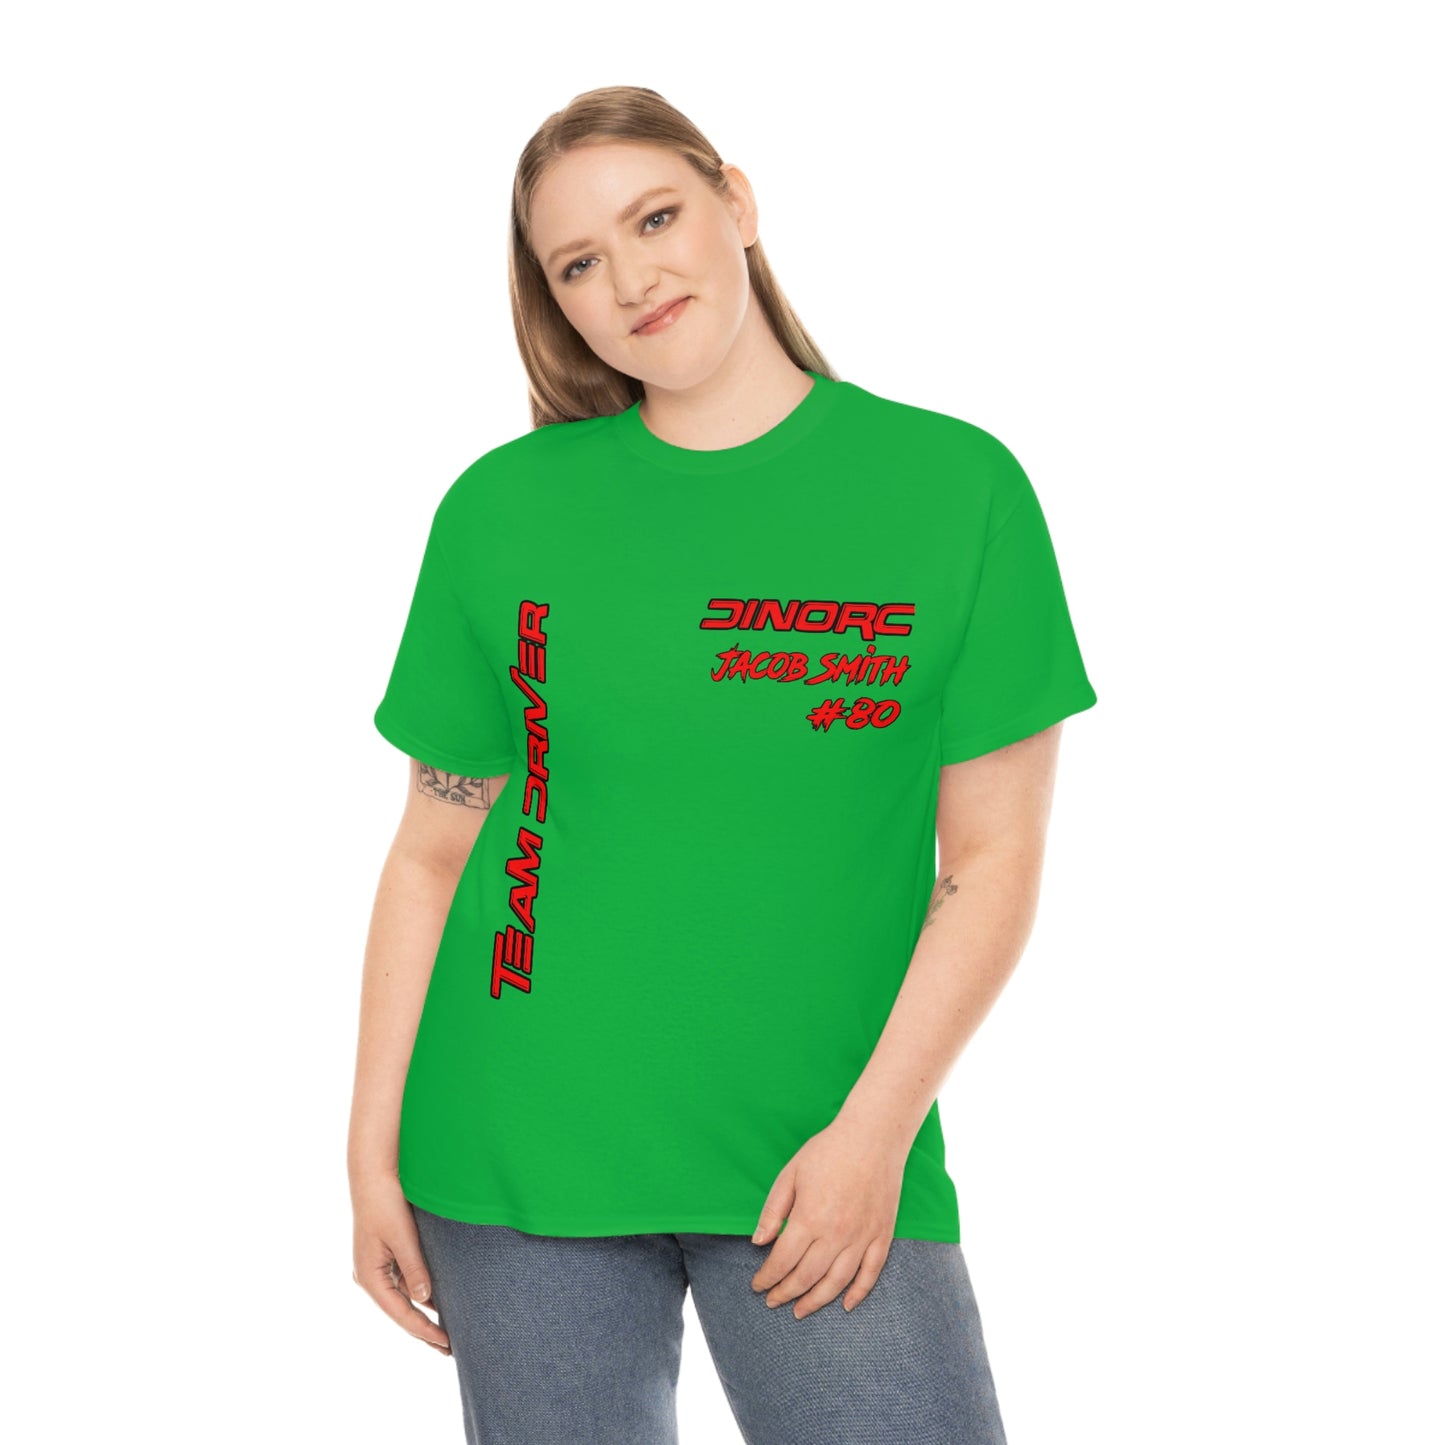 Vertical Team Driver Jacob Smith truck logo Front and Back DinoRc Logo T-Shirt S-5x 5 colors